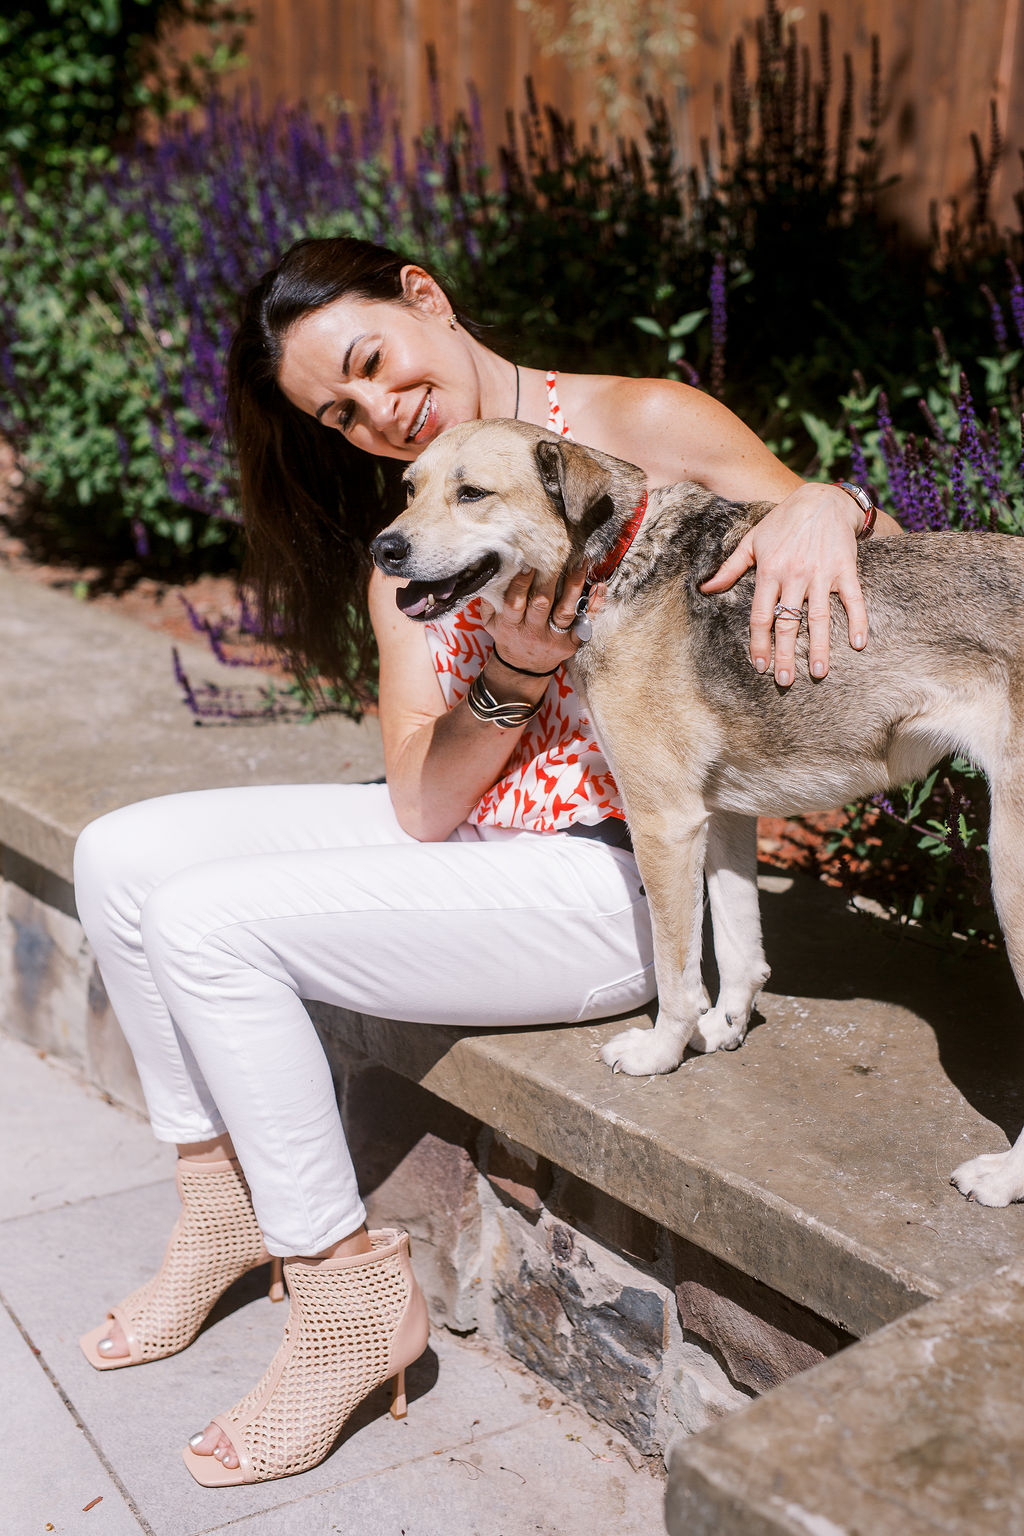 a woman with dark hair looks lovingly at a medium sized dog with blonde fur